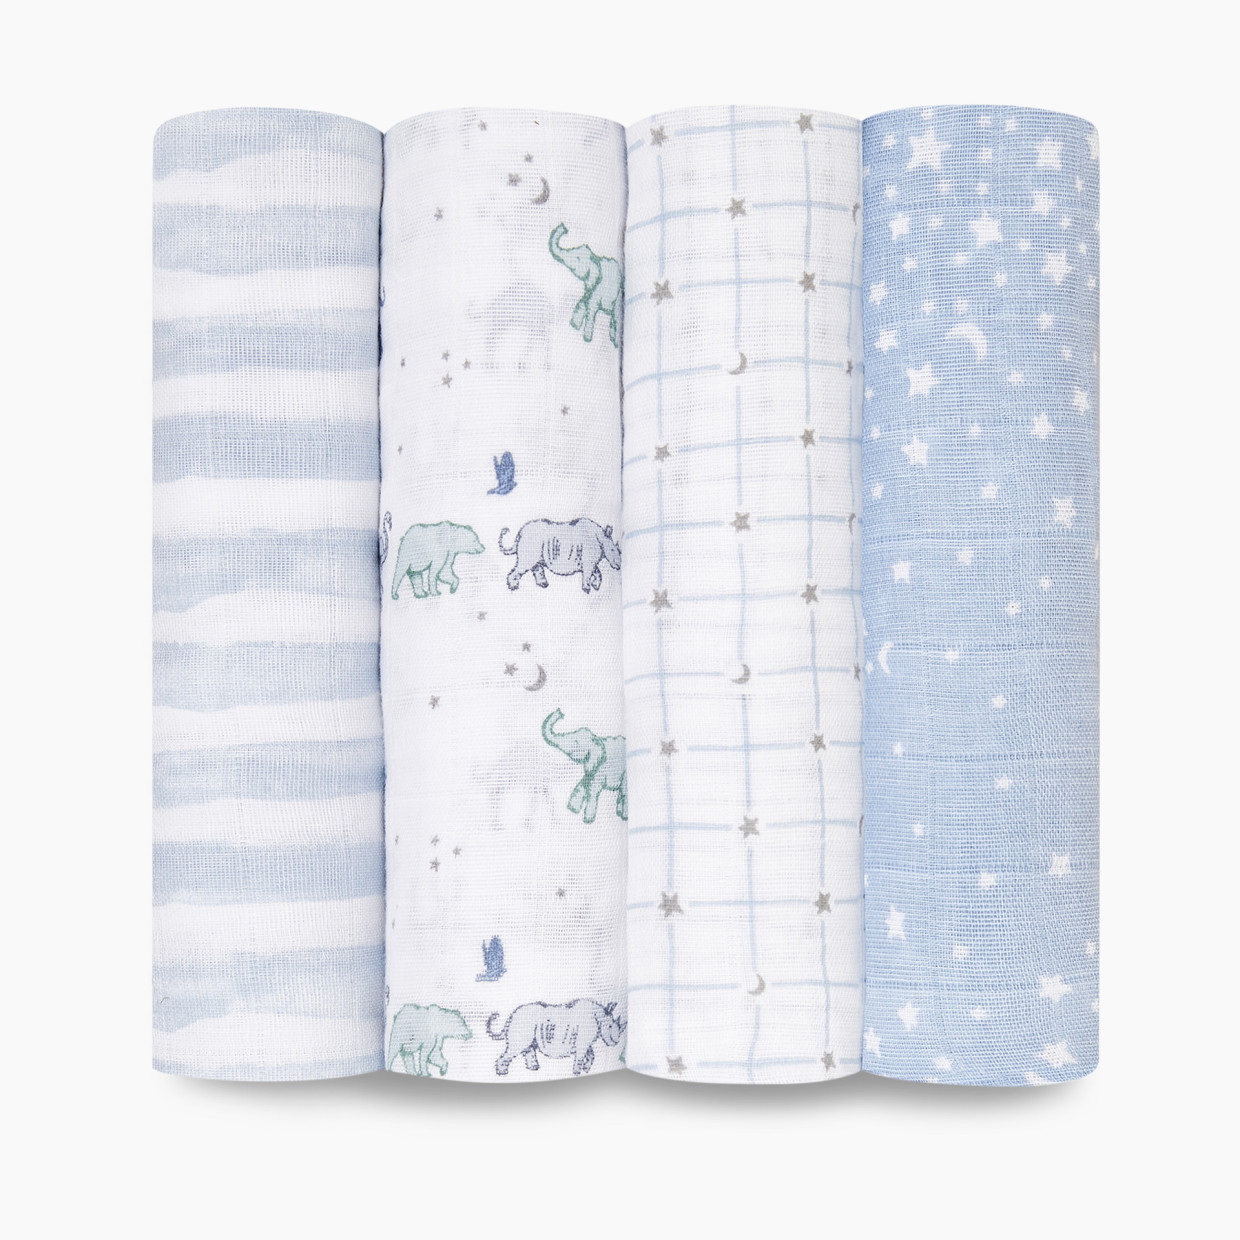 Aden + Anais Cotton Muslin Swaddle 4-Pack - Rising Star.